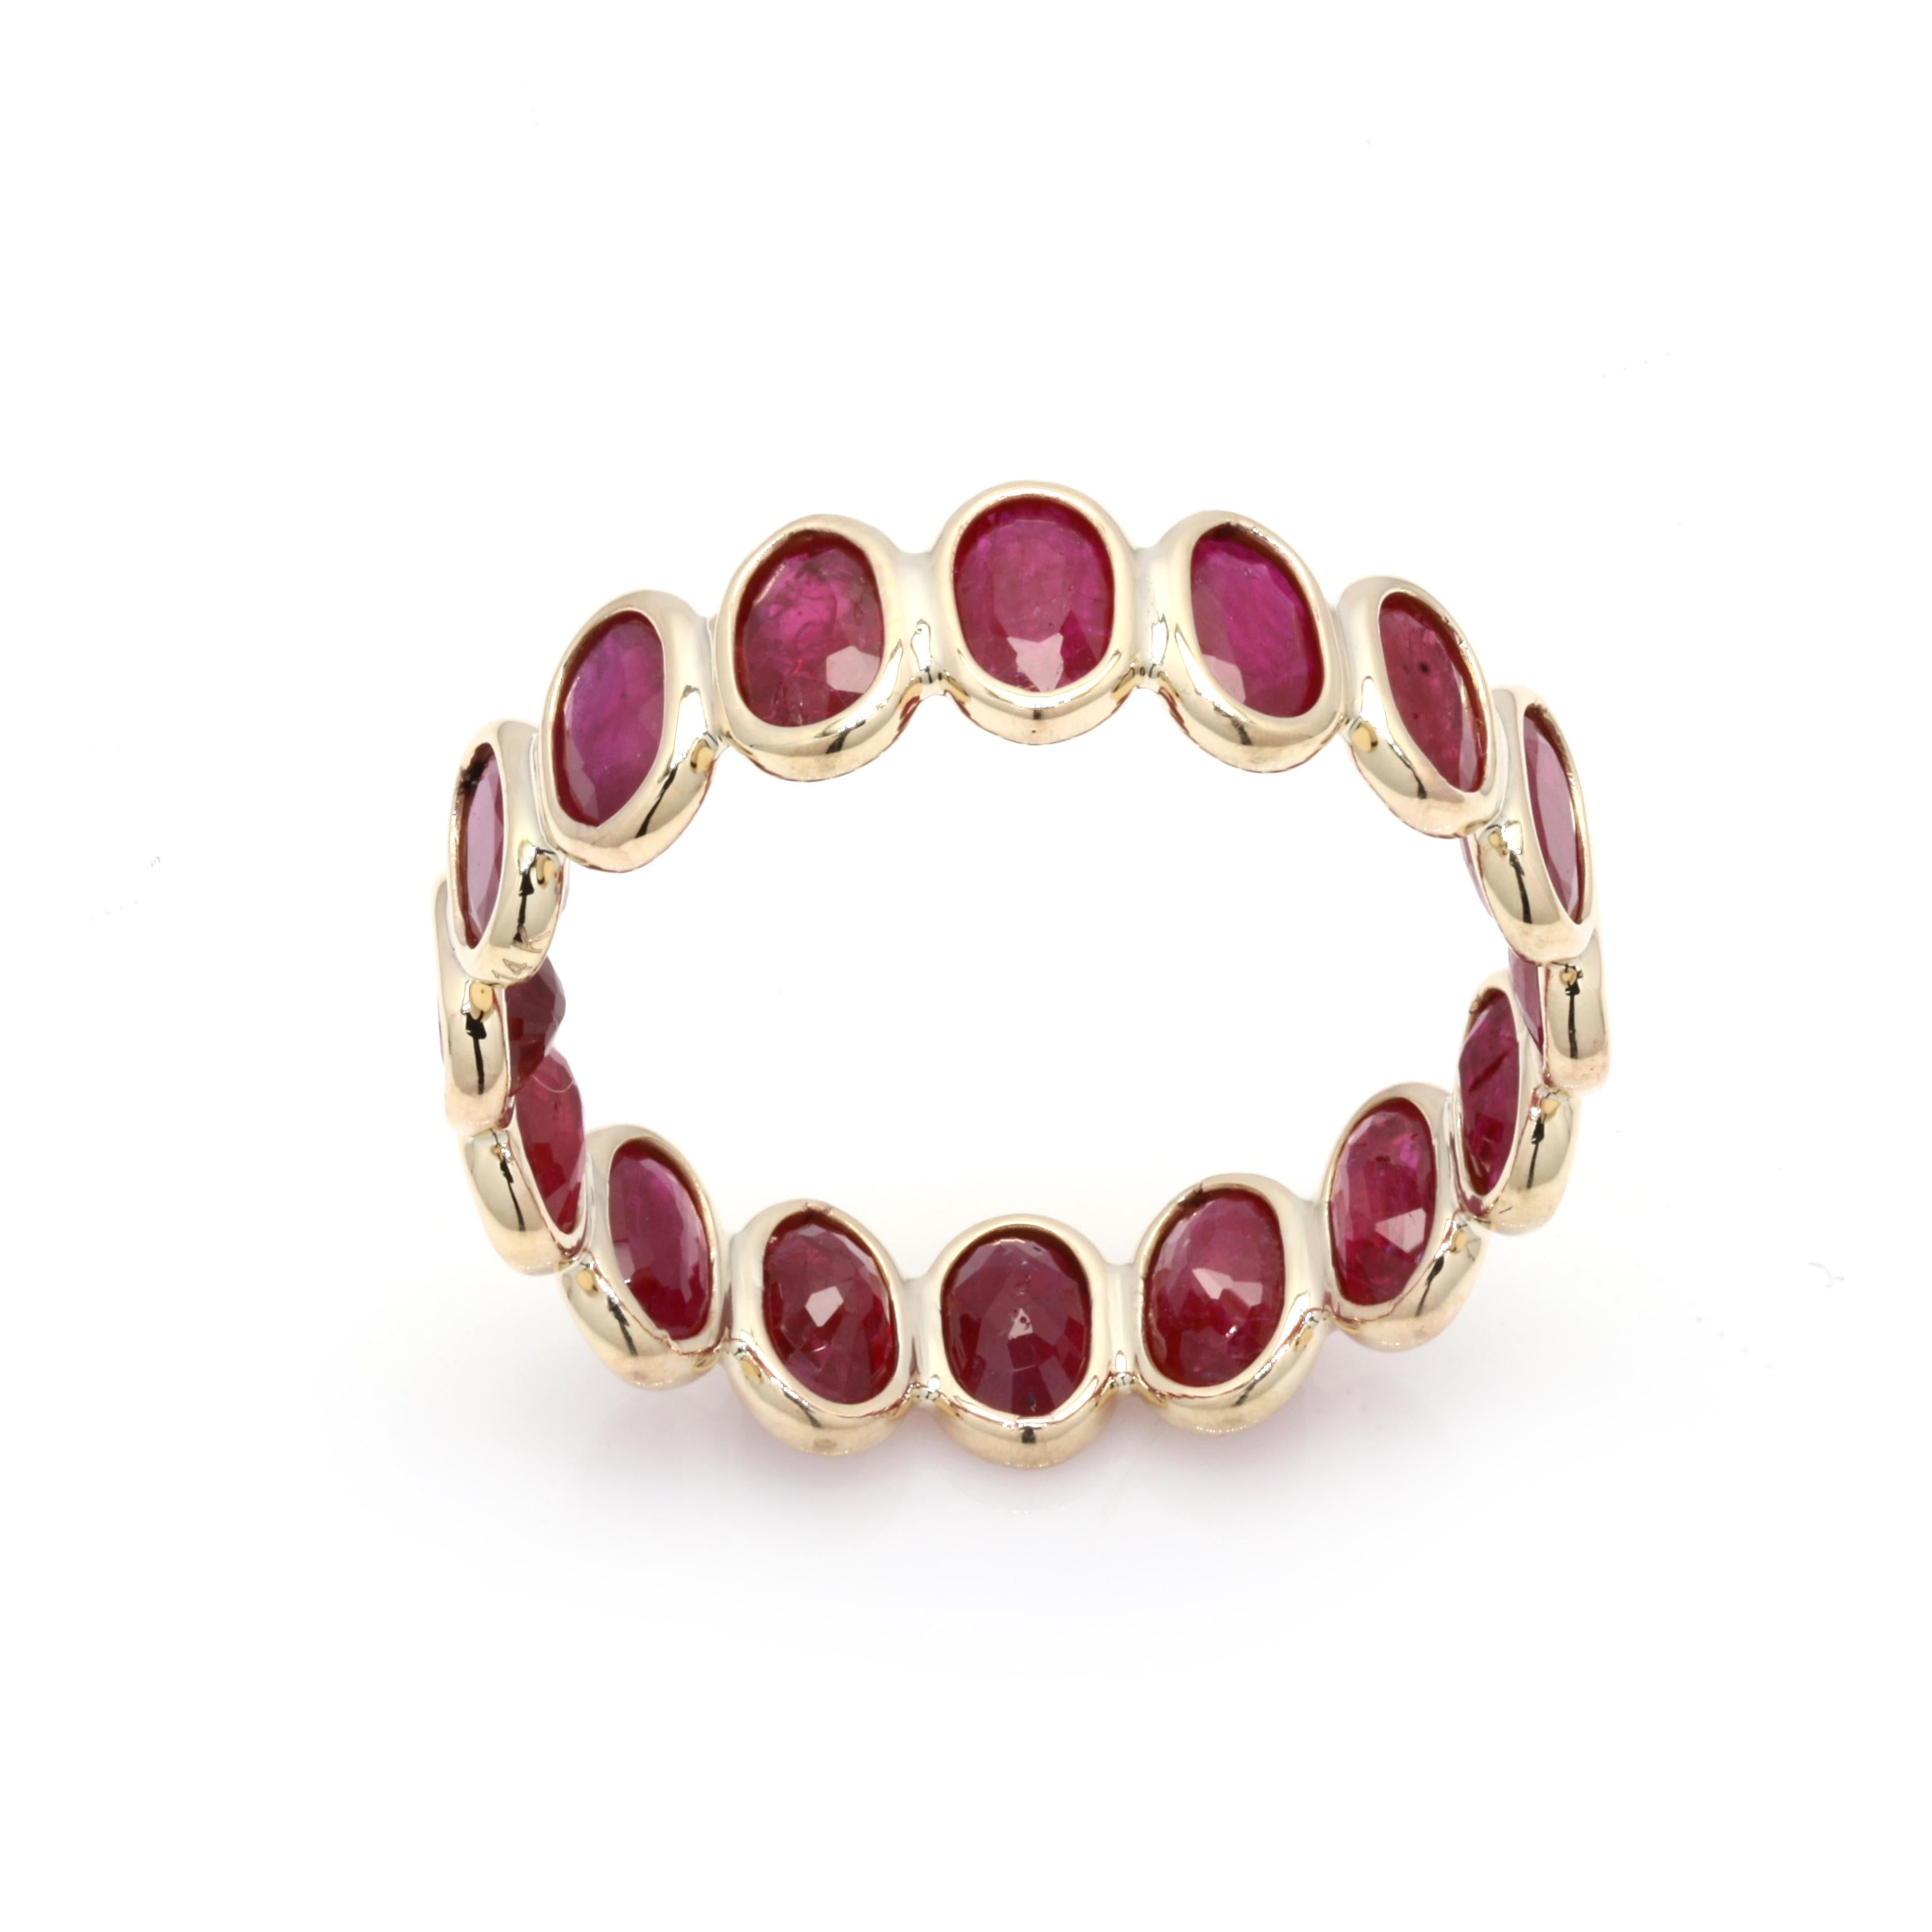 For Sale:  Stackable 4.43 Ct Oval Red Ruby Eternity Band Ring Mounted in 14K Yellow Gold 2